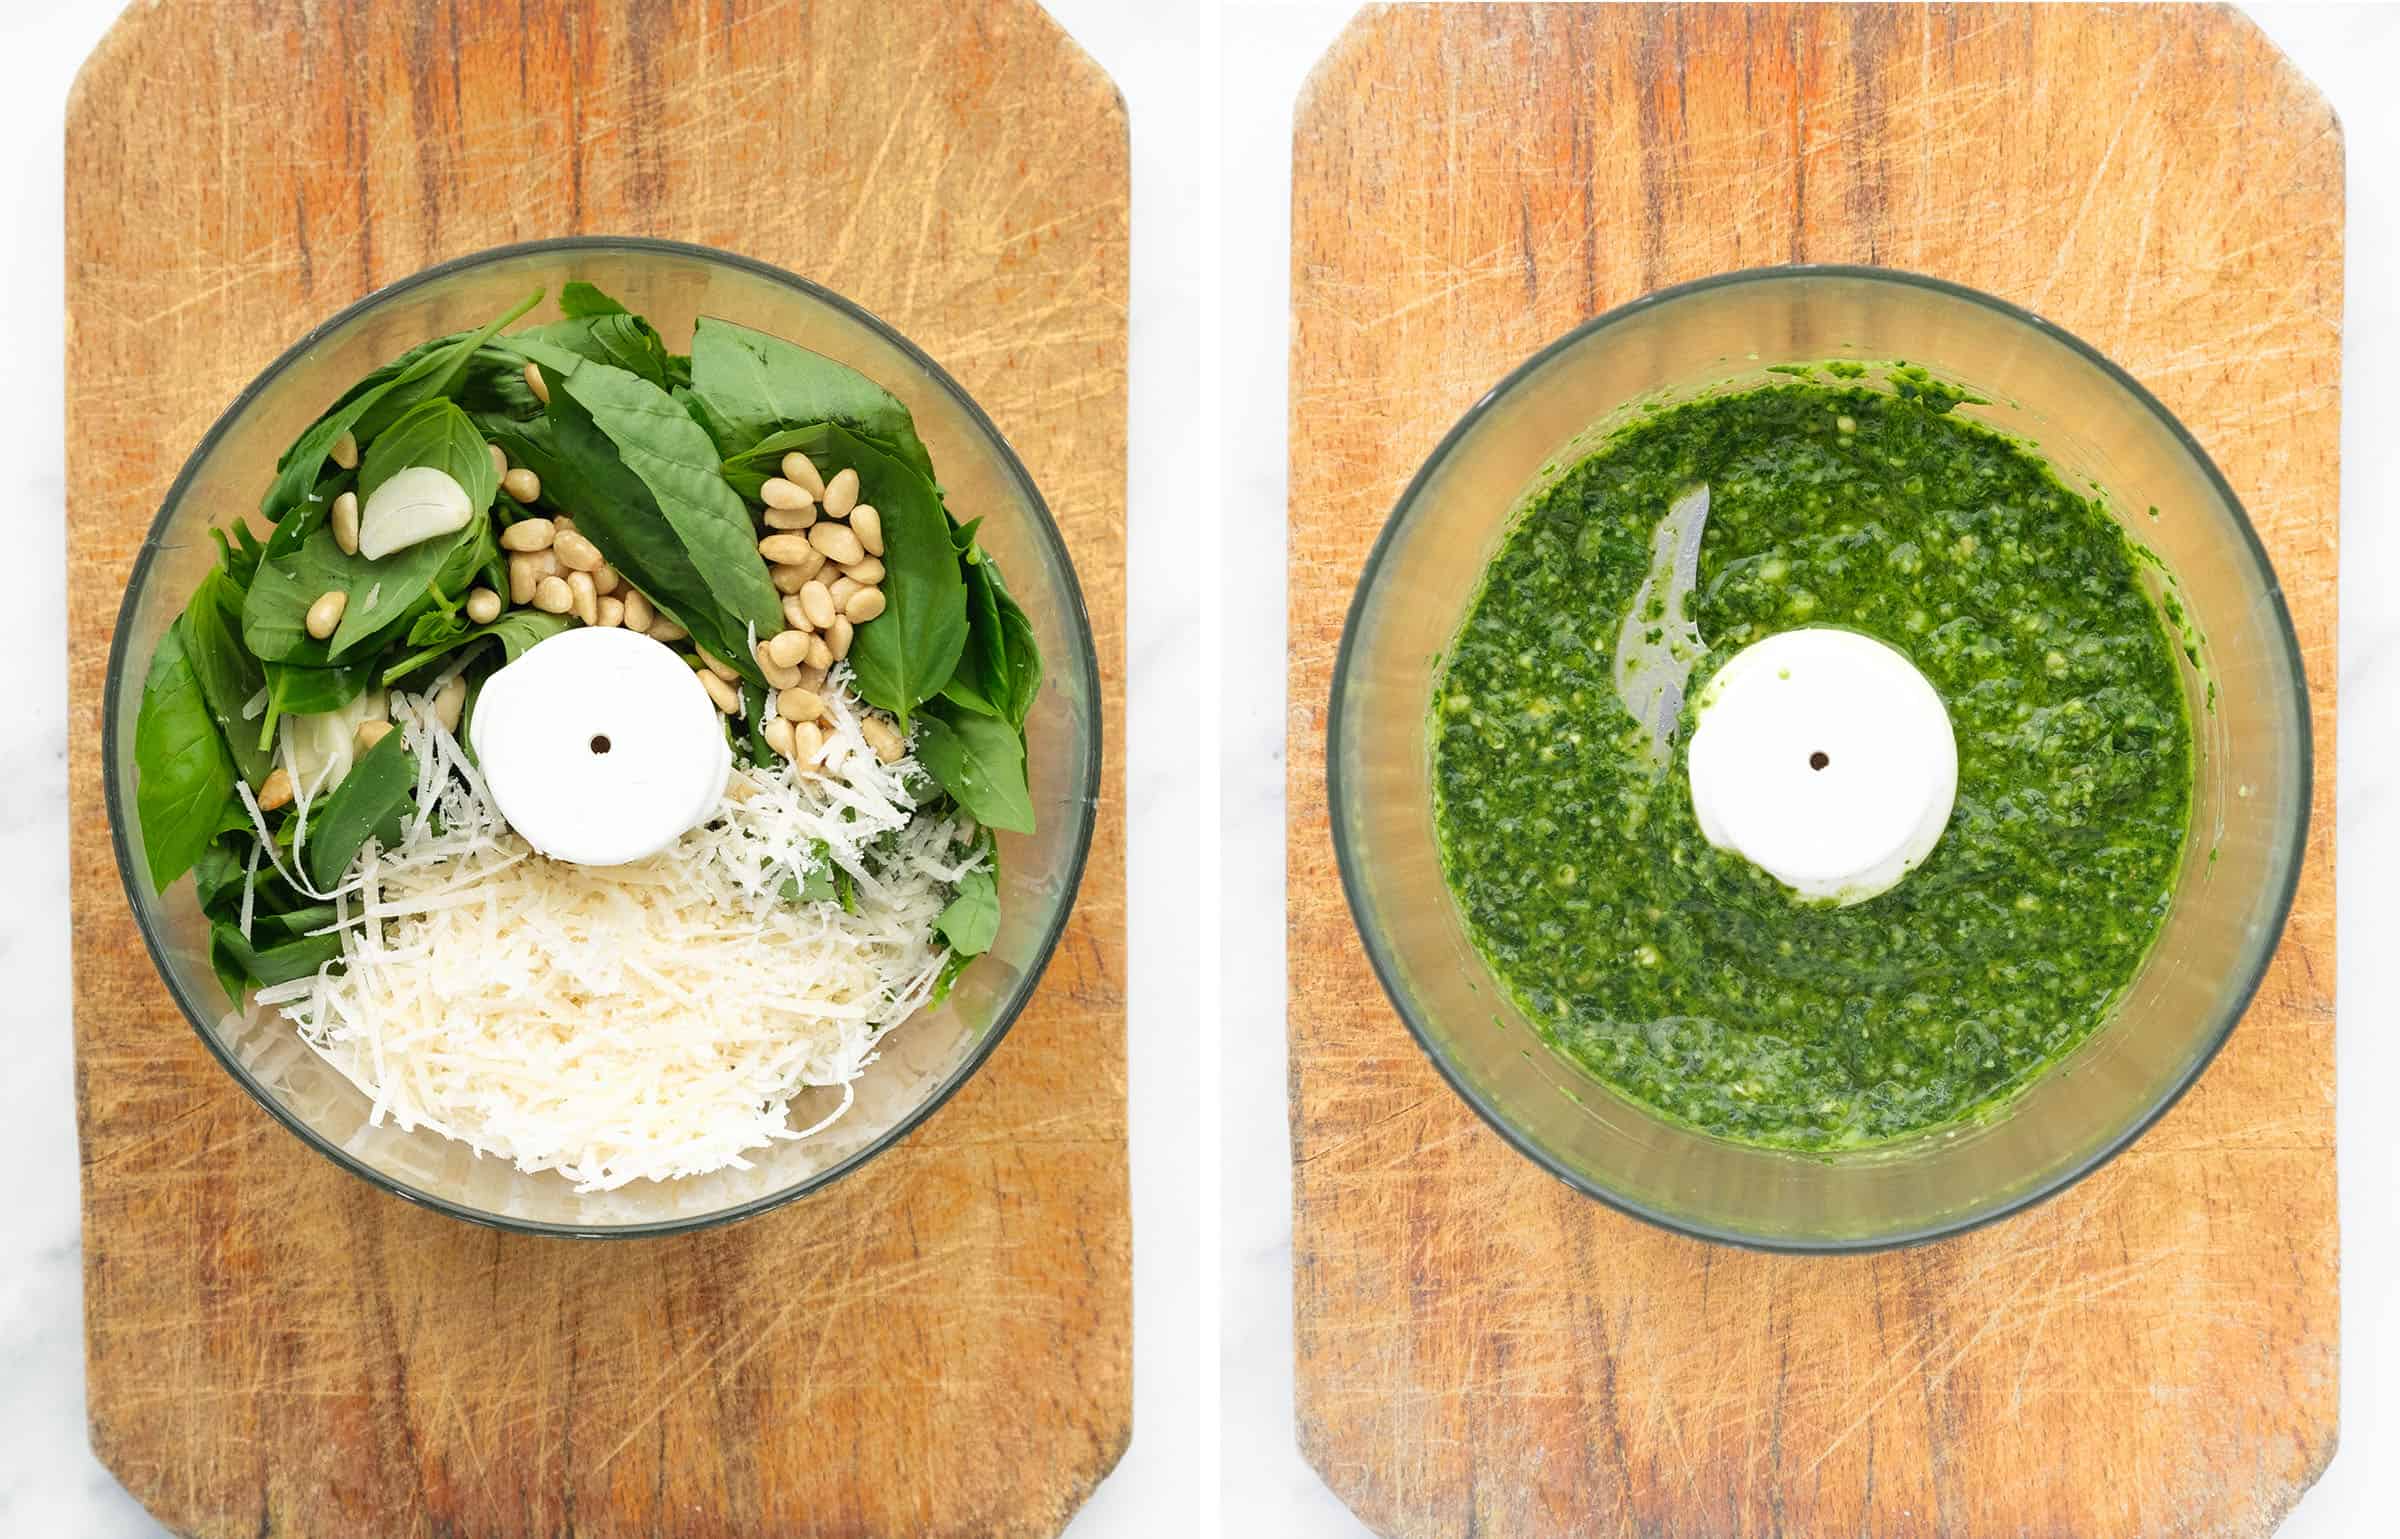 Top view of a food processor full of basil pesto ingredients before and after blending.